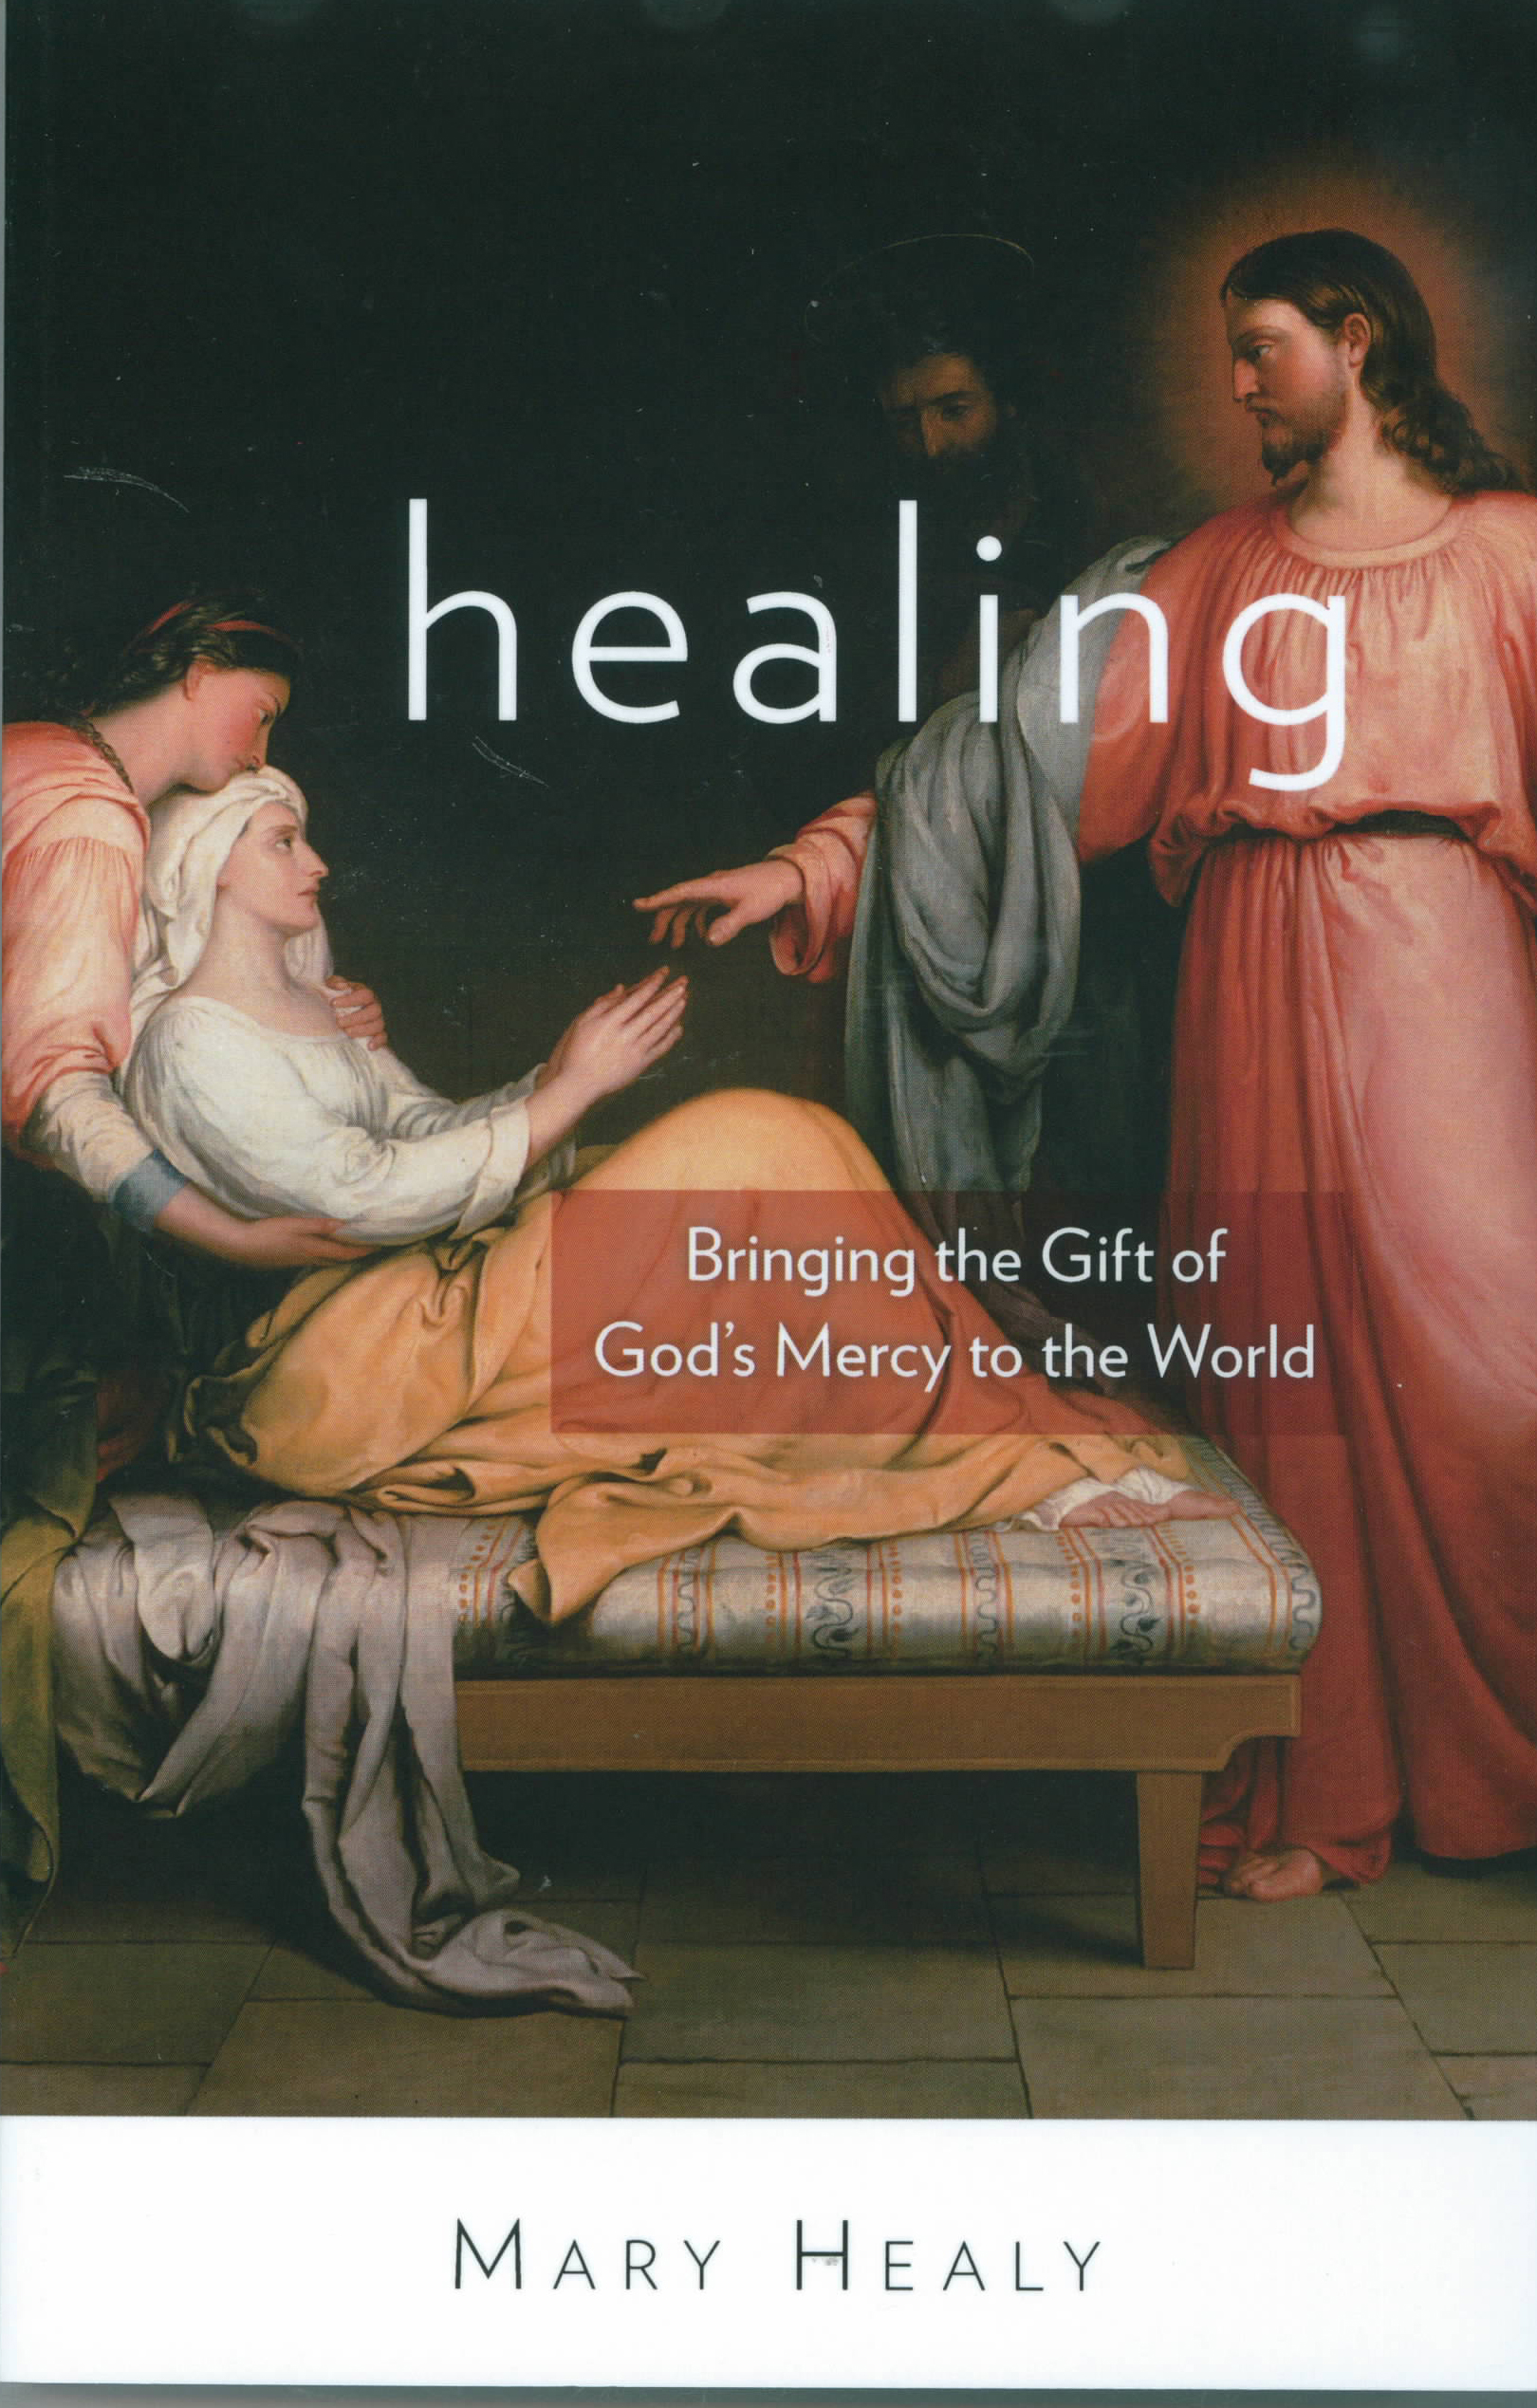 Healing: Bringing the Gift of God's Mercy to the World by Mary Healy  ISBN: 1612788203   EAN: 9781612788203